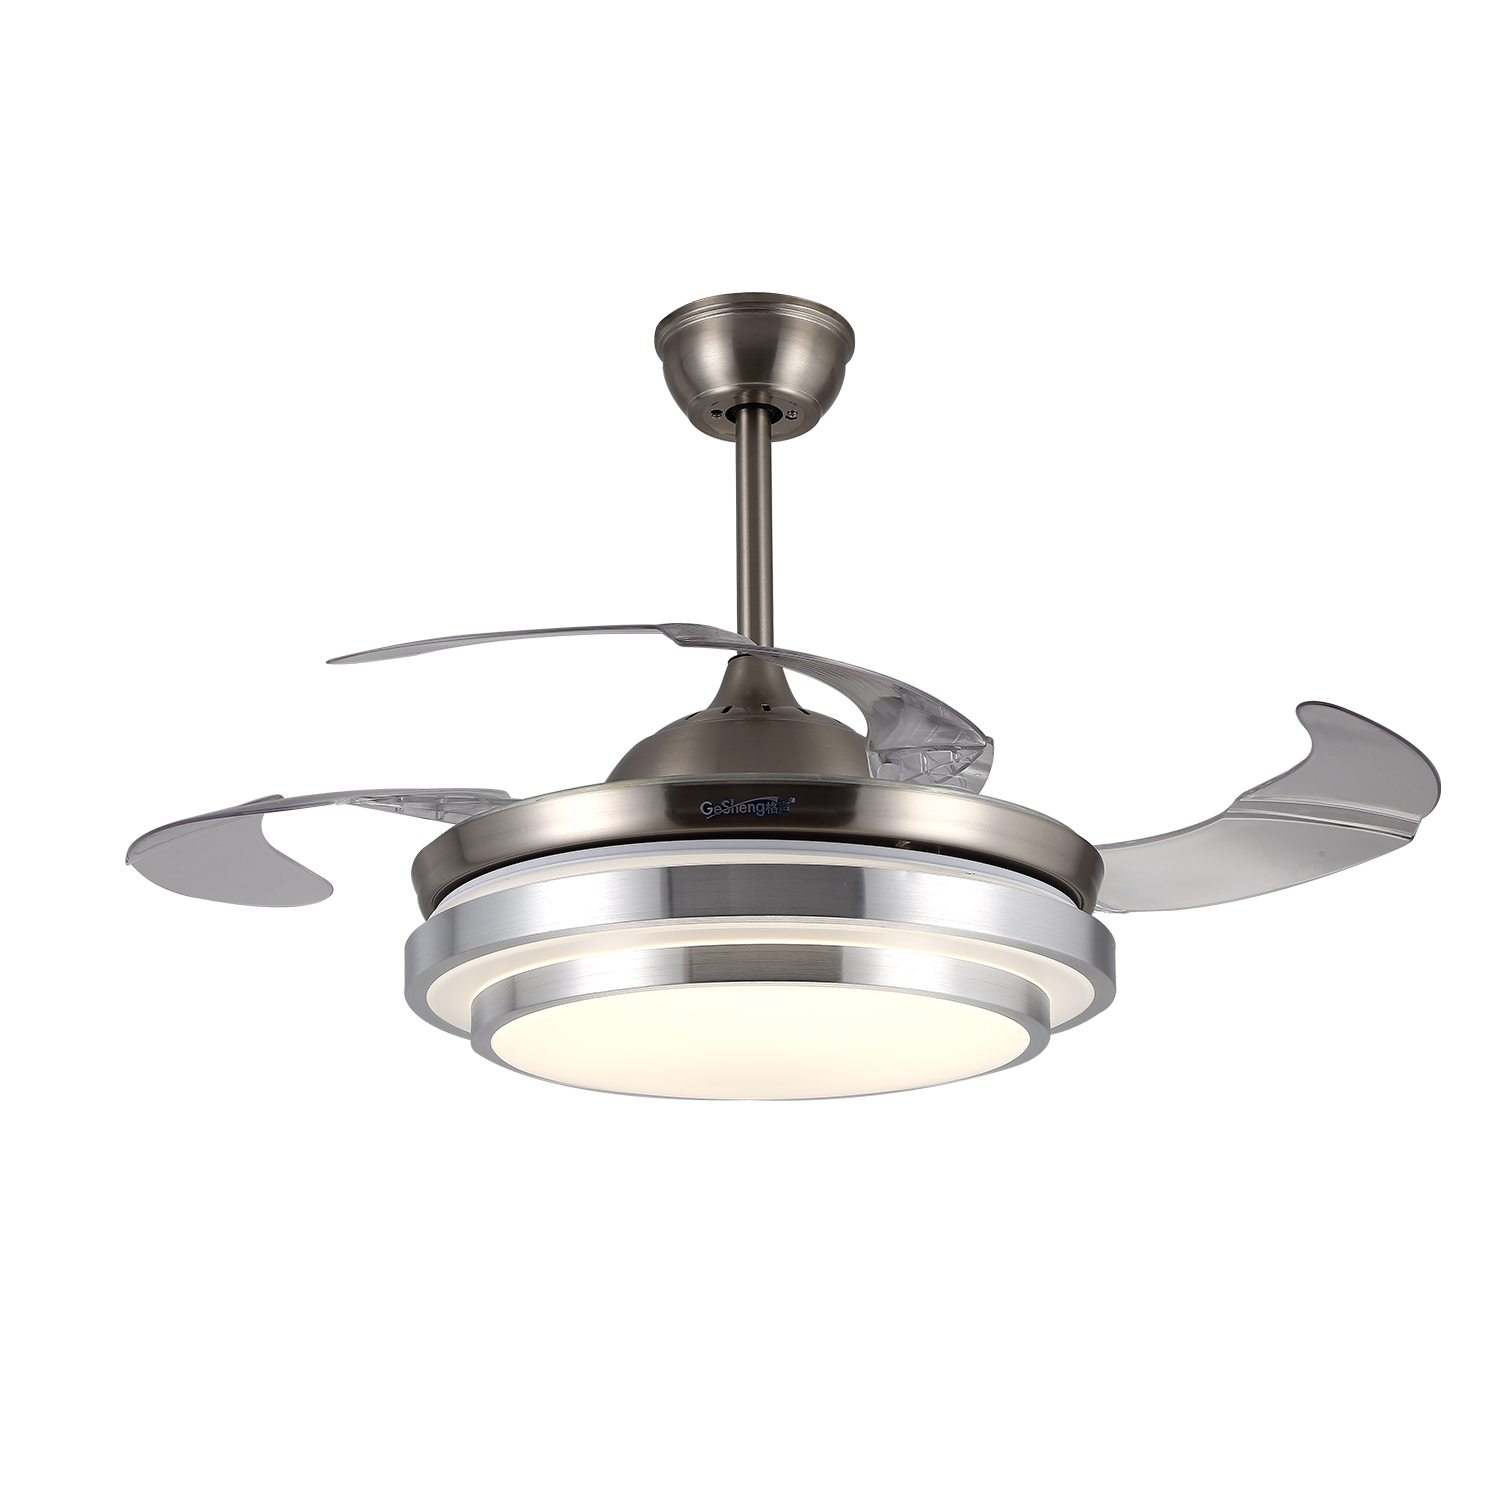 Enhance Your Space with a Sleek Modern Ceiling Fan